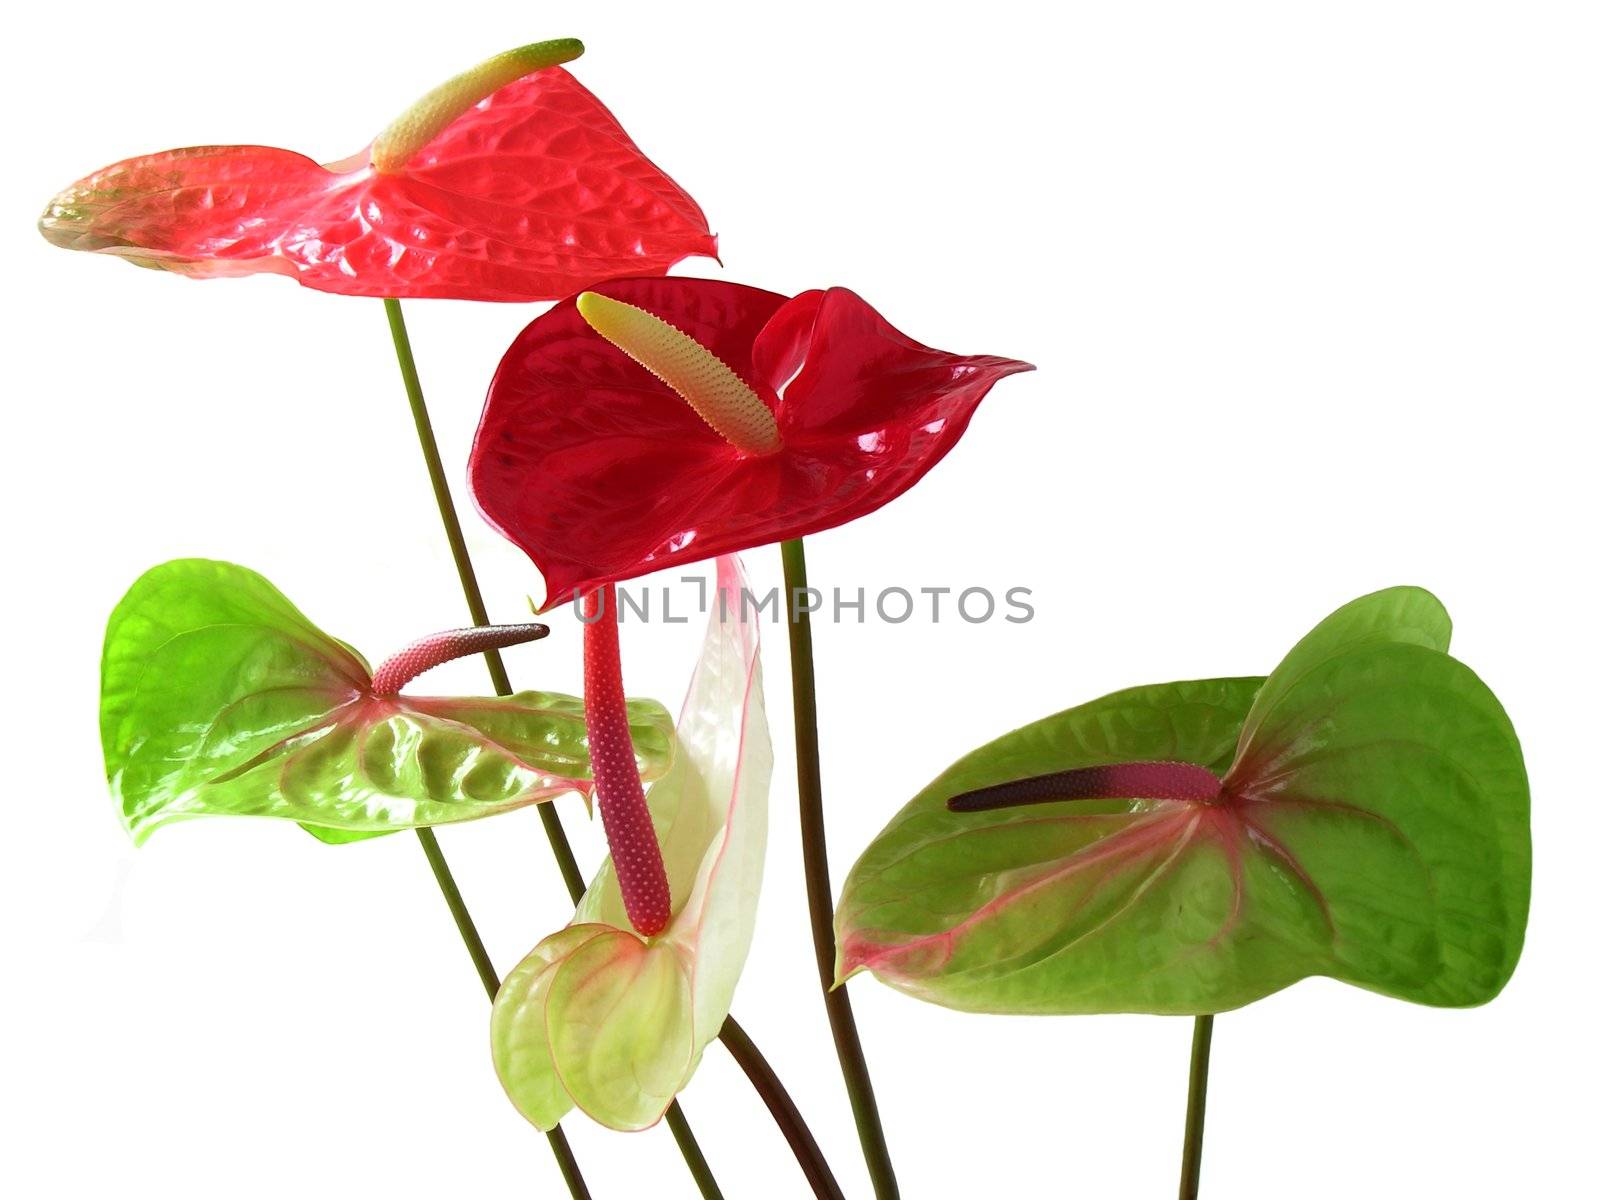 anthurium flowers are pretty and oryginal